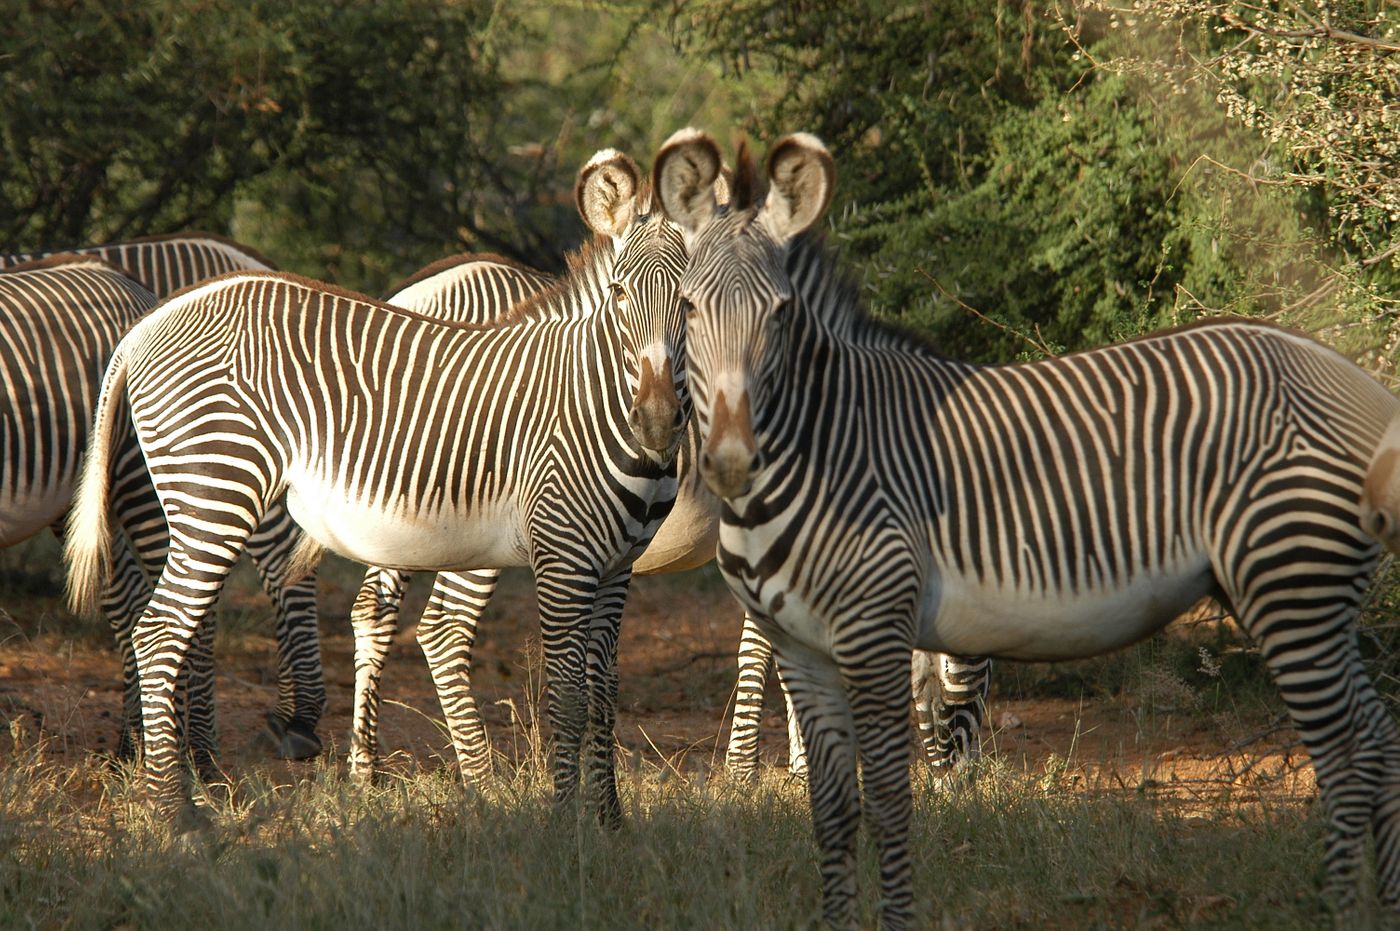 Grevy's zebras at the Mpala Research Centre. Photo by Margaret Kinnaird